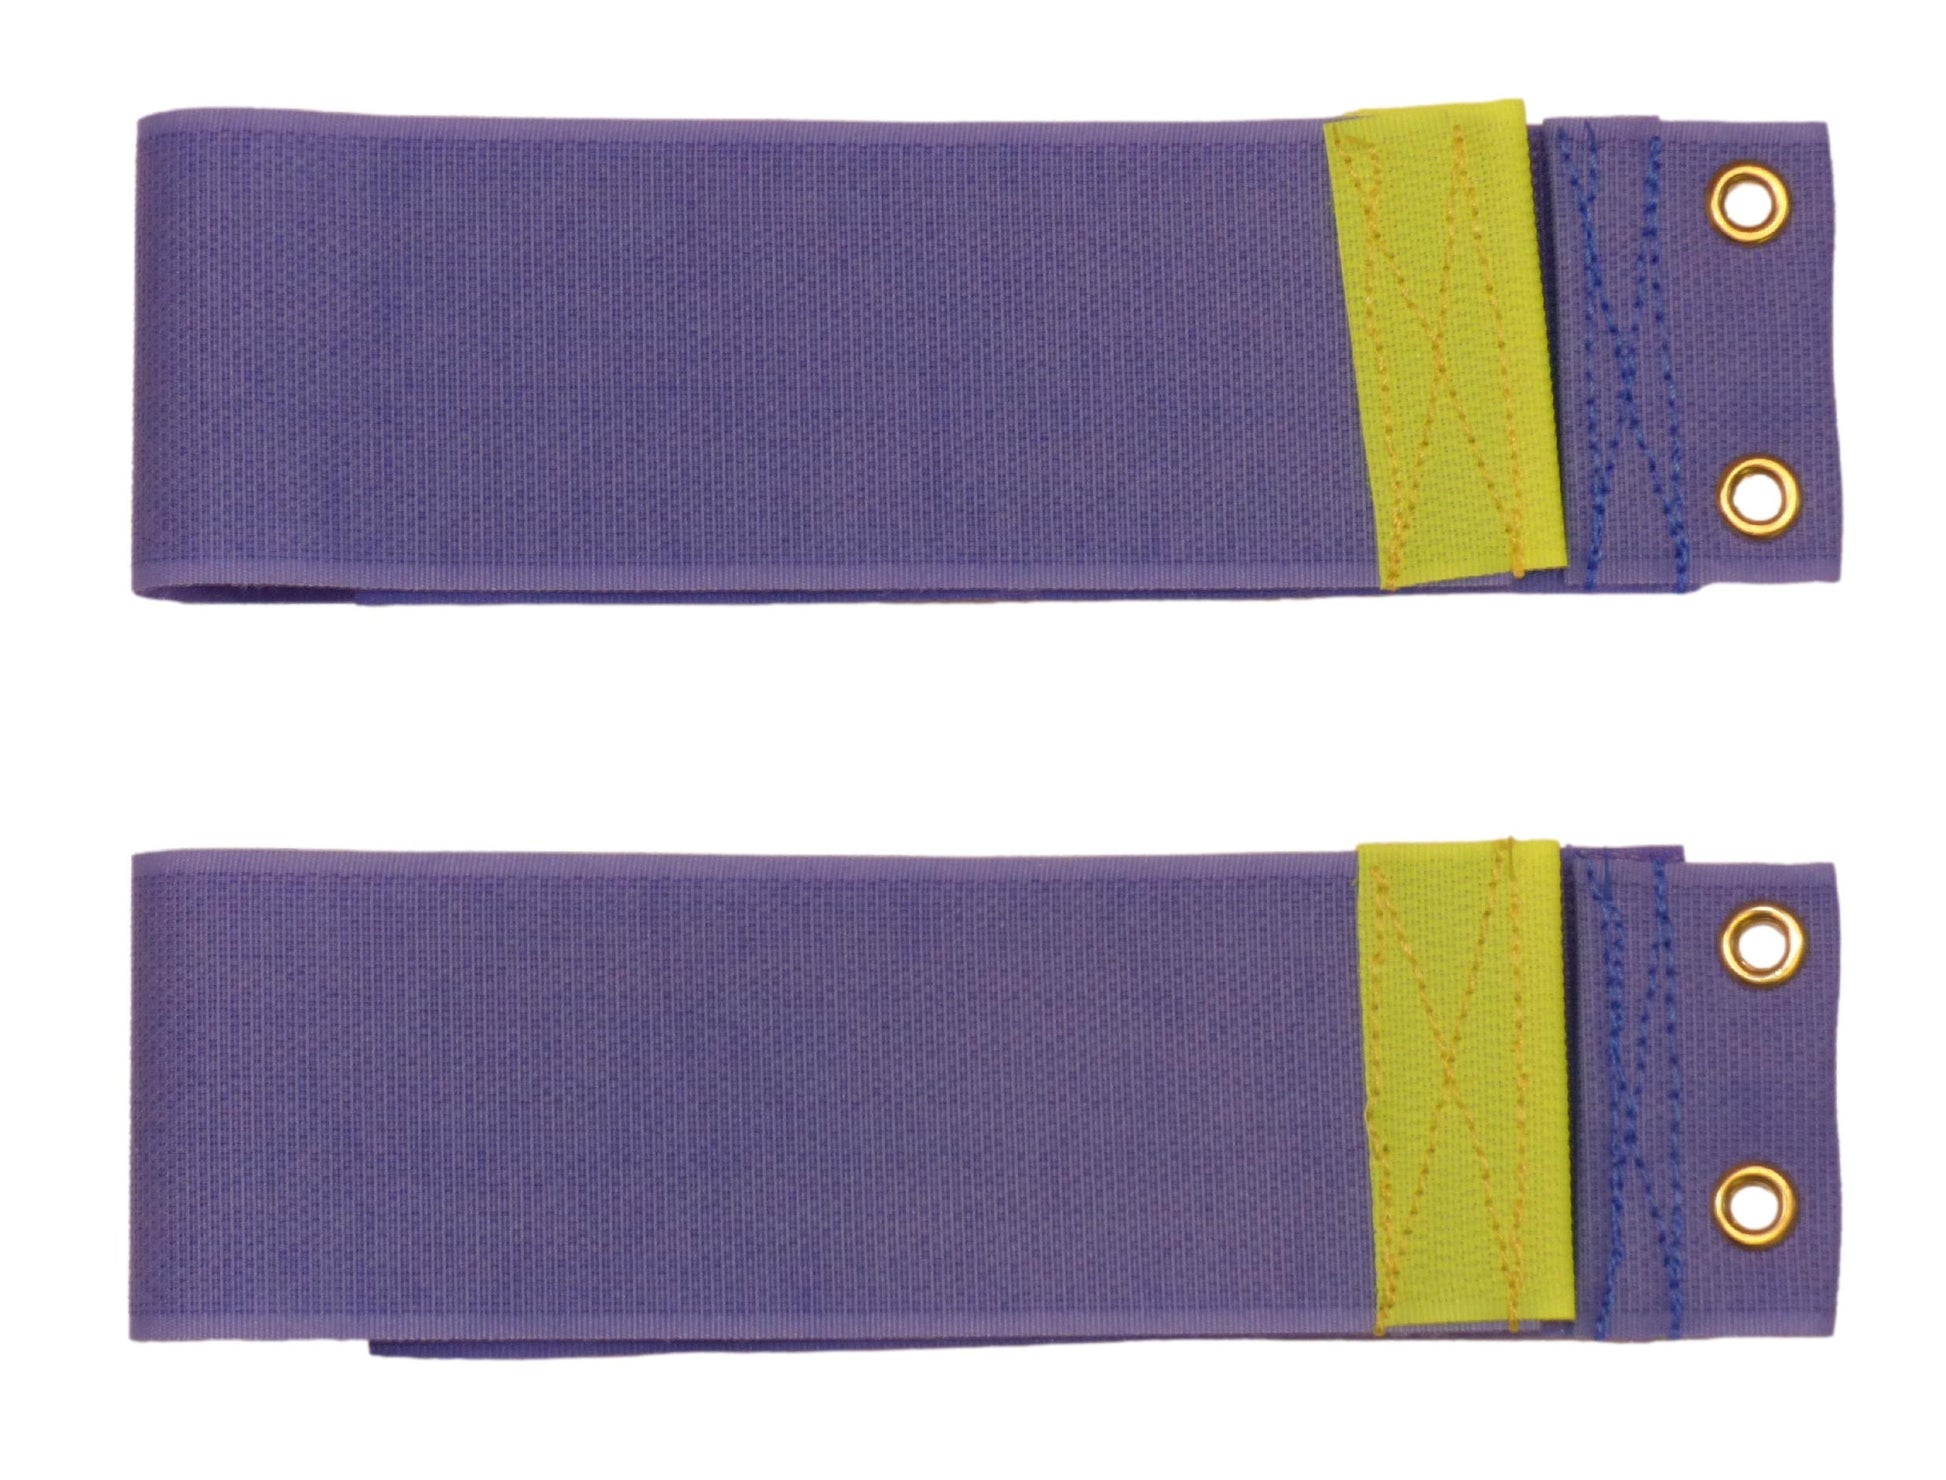 Premium 50mm Hook & Loop Tidy & Hang Strap with Eyelet (Pack of Two) in blue